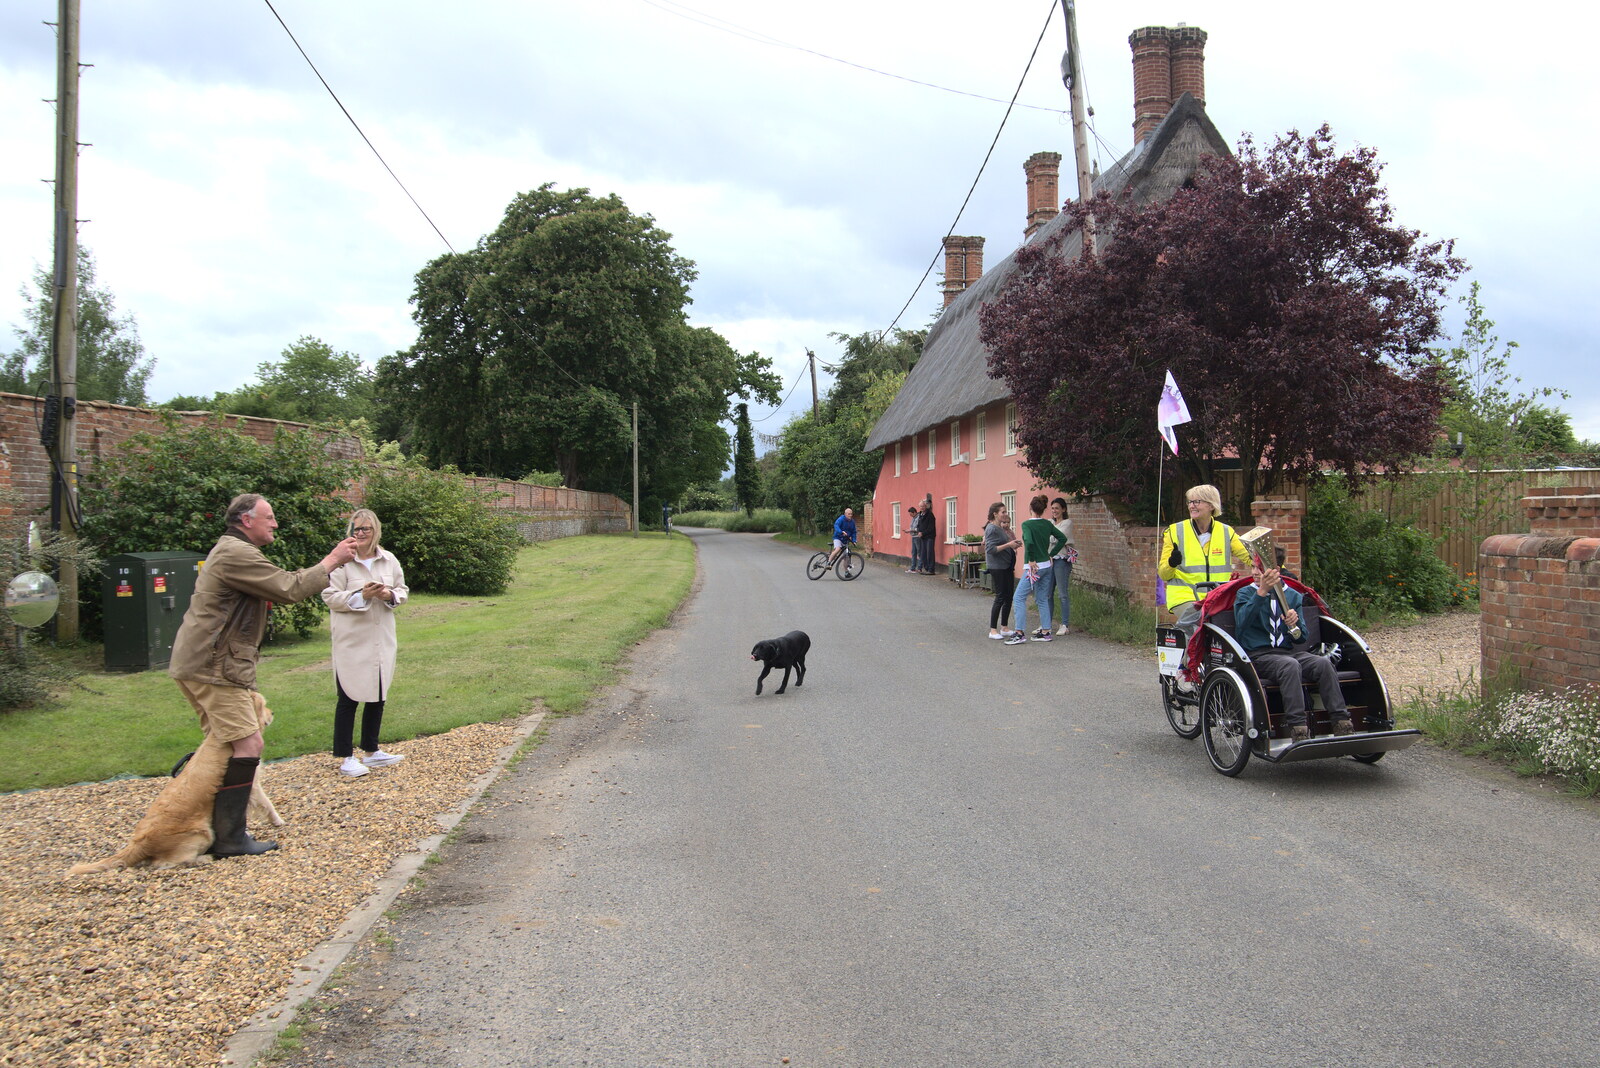 There's a stop for another photo from The Jubilee Torch Run, Brome and Oakley, Suffolk - 25th May 2022